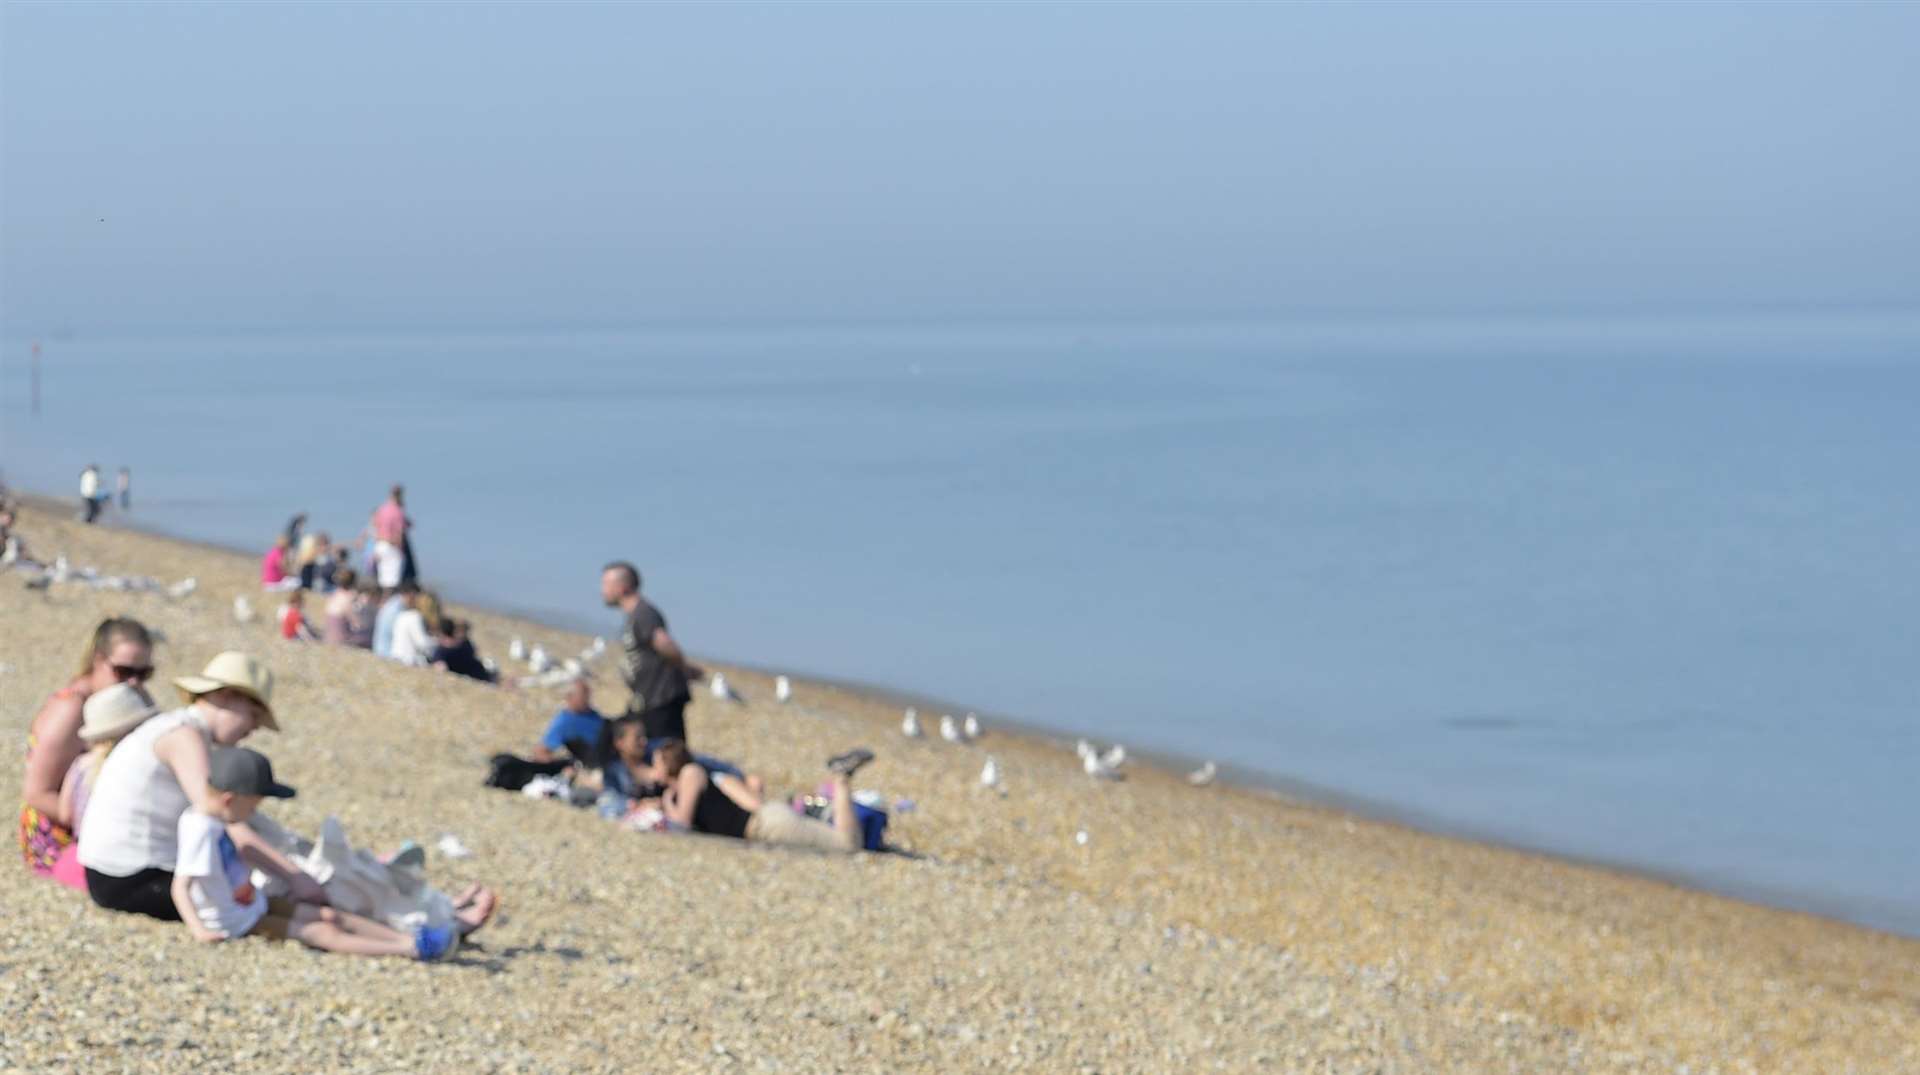 Don't put your sunglasses away just yet, warm and sunny spells are expected to reach Kent soon